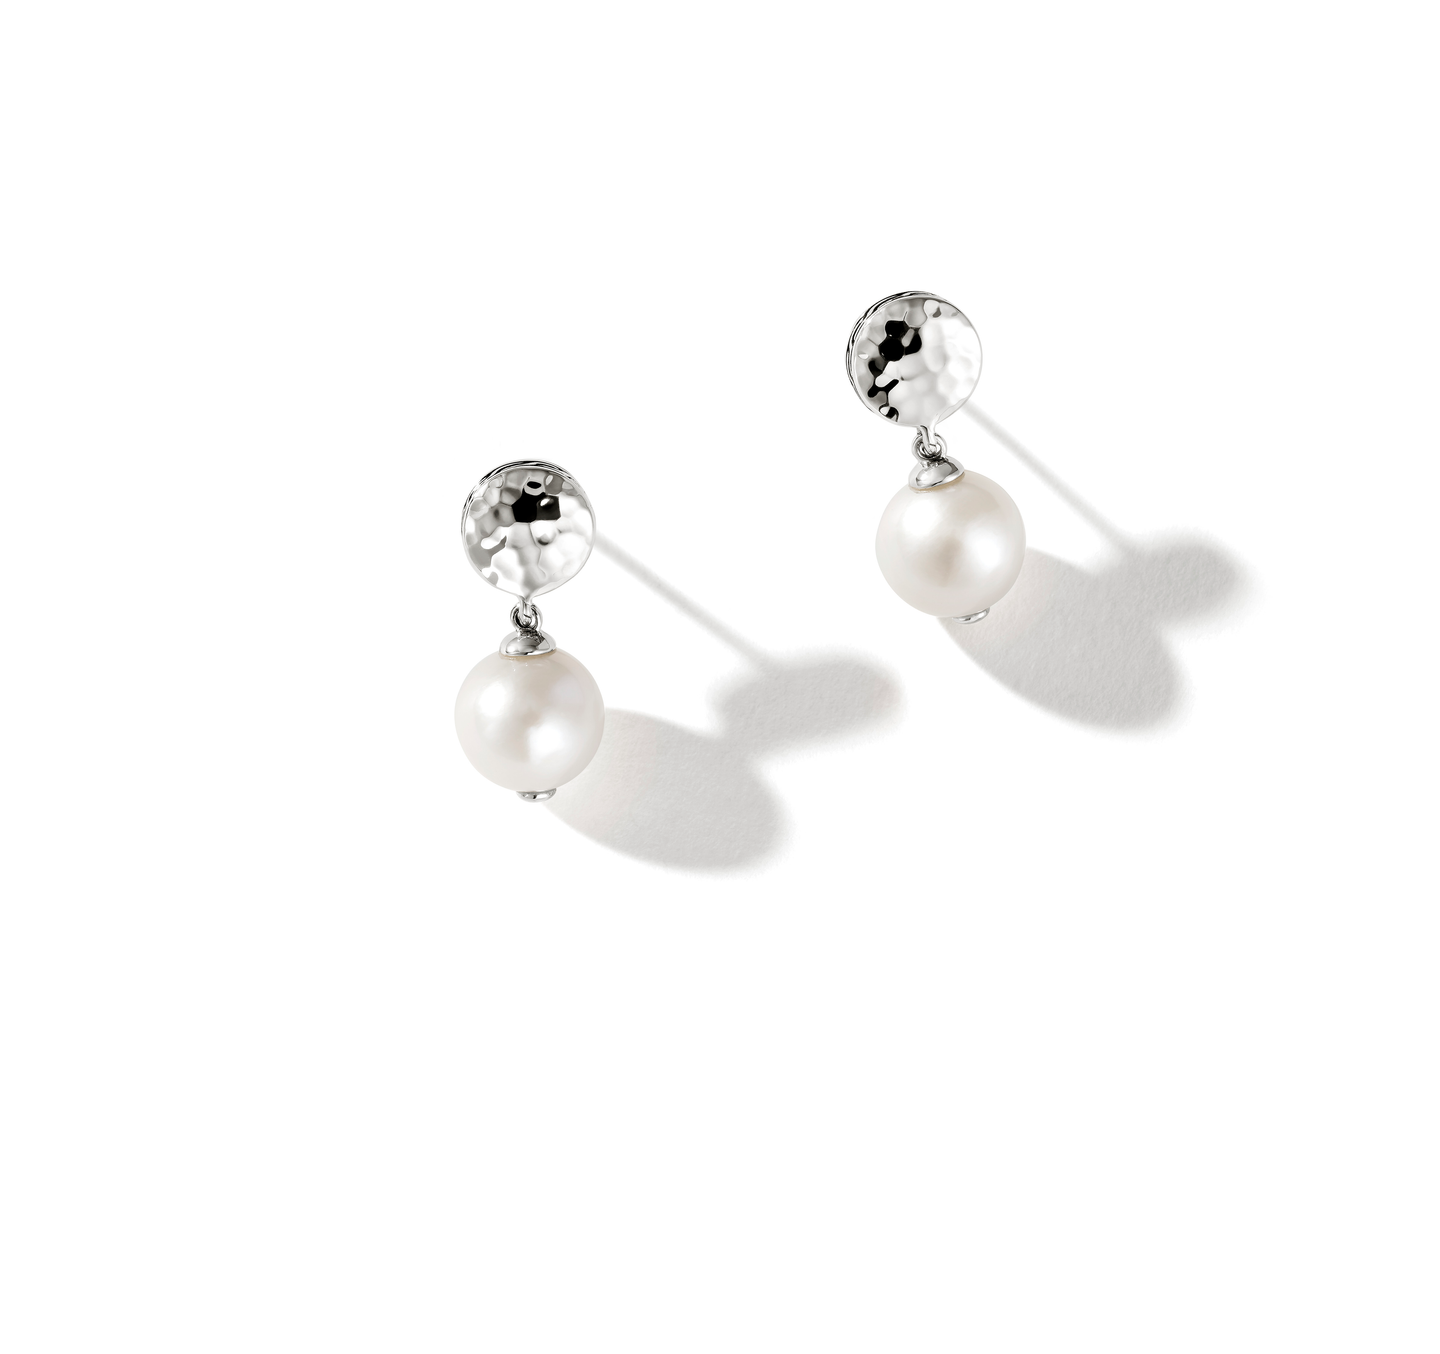 John Hardy Hammered Silver Earrings with Fresh Water Pearls